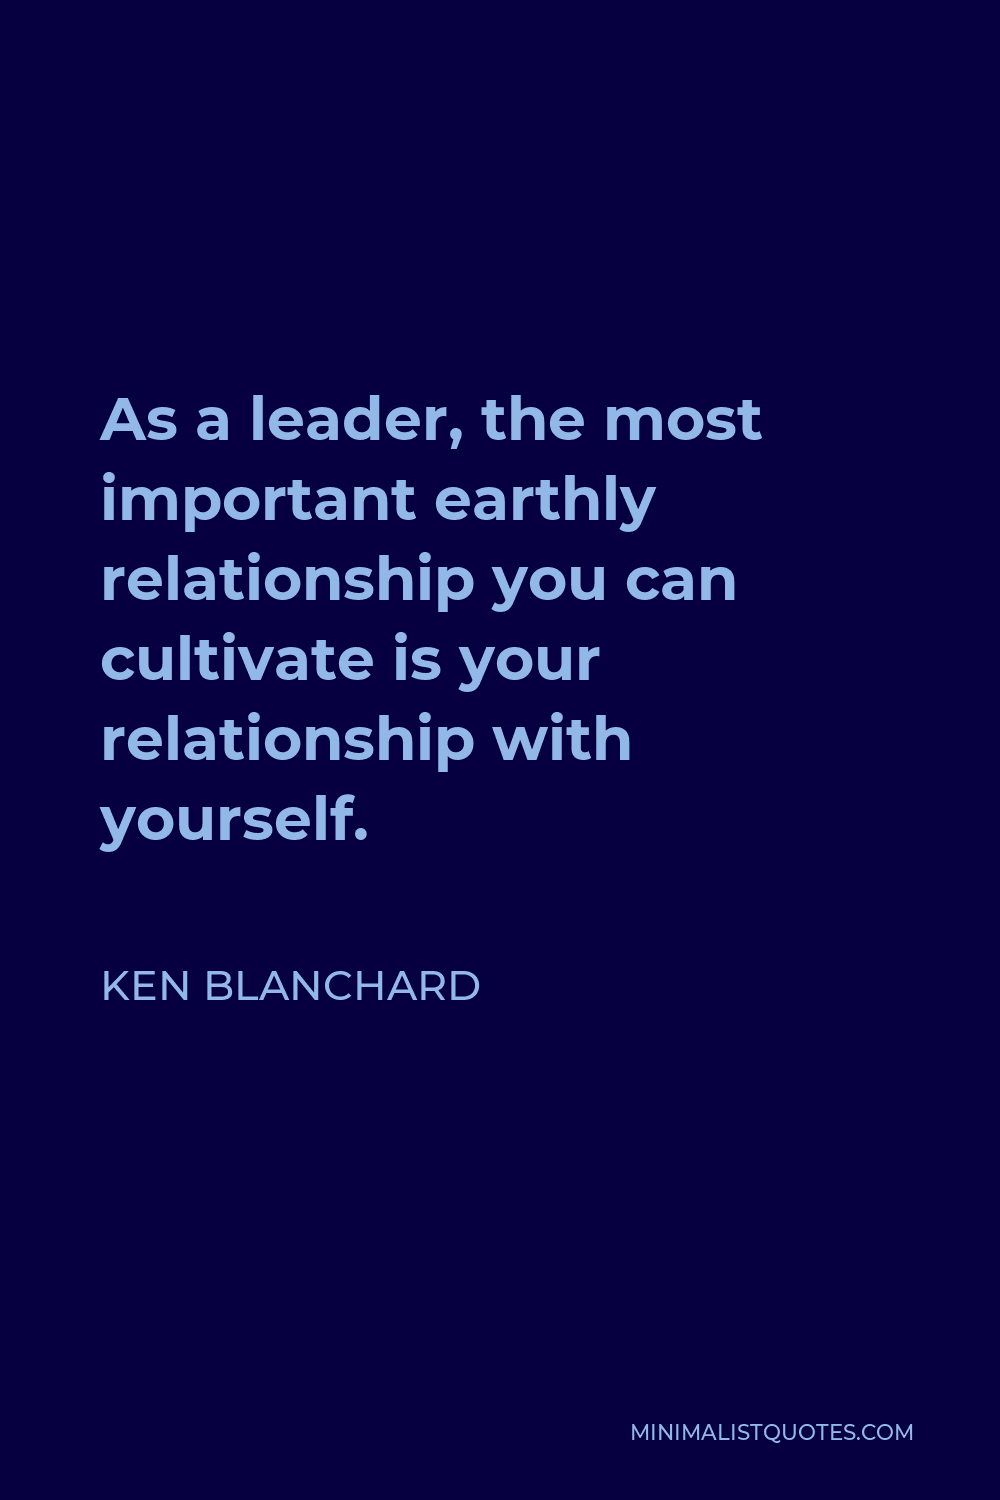 Ken Blanchard Quote - As a leader, the most important earthly relationship you can cultivate is your relationship with yourself.